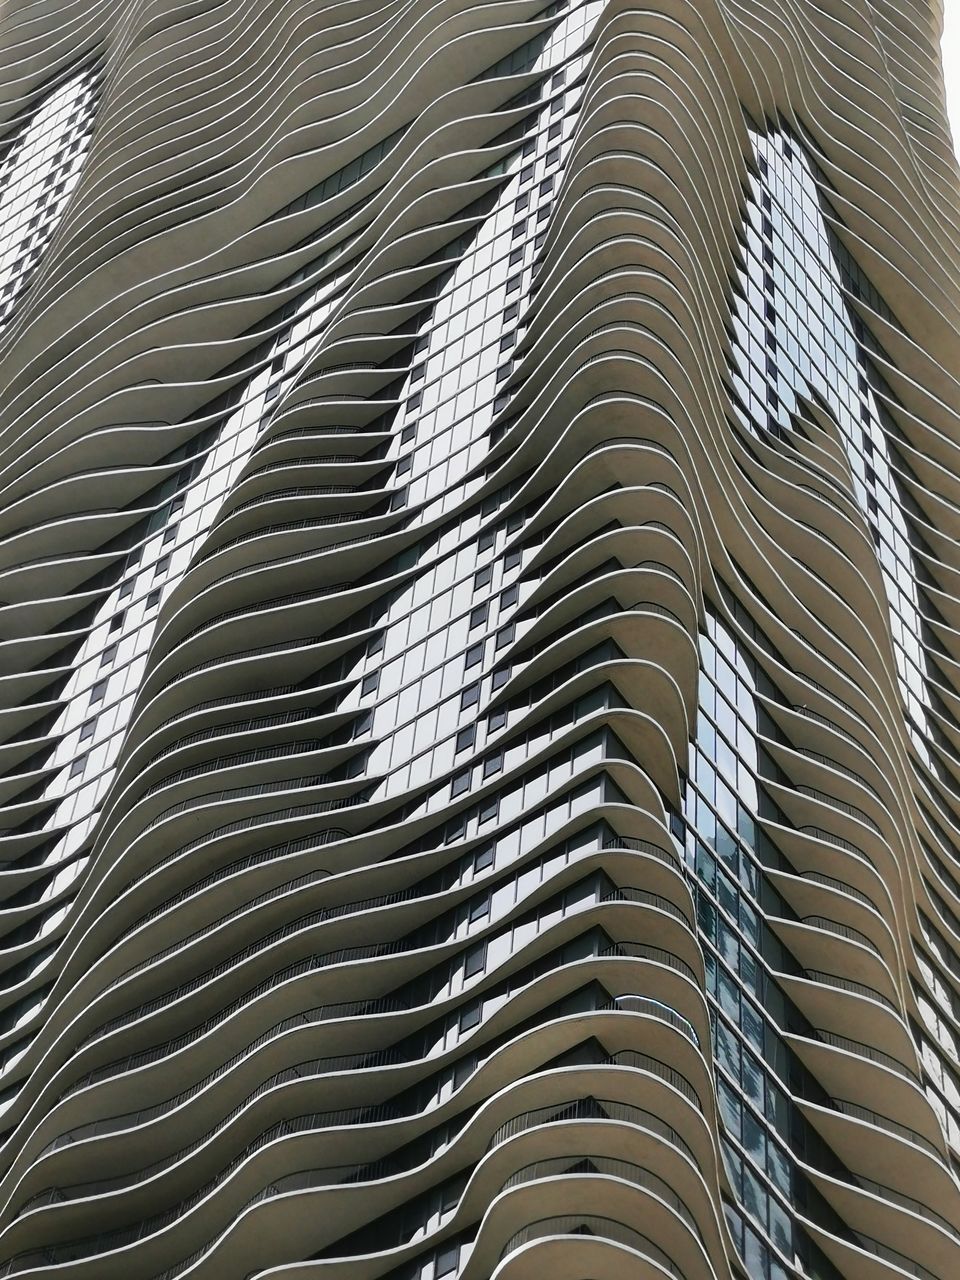 FULL FRAME SHOT OF ABSTRACT STACK OF PATTERN